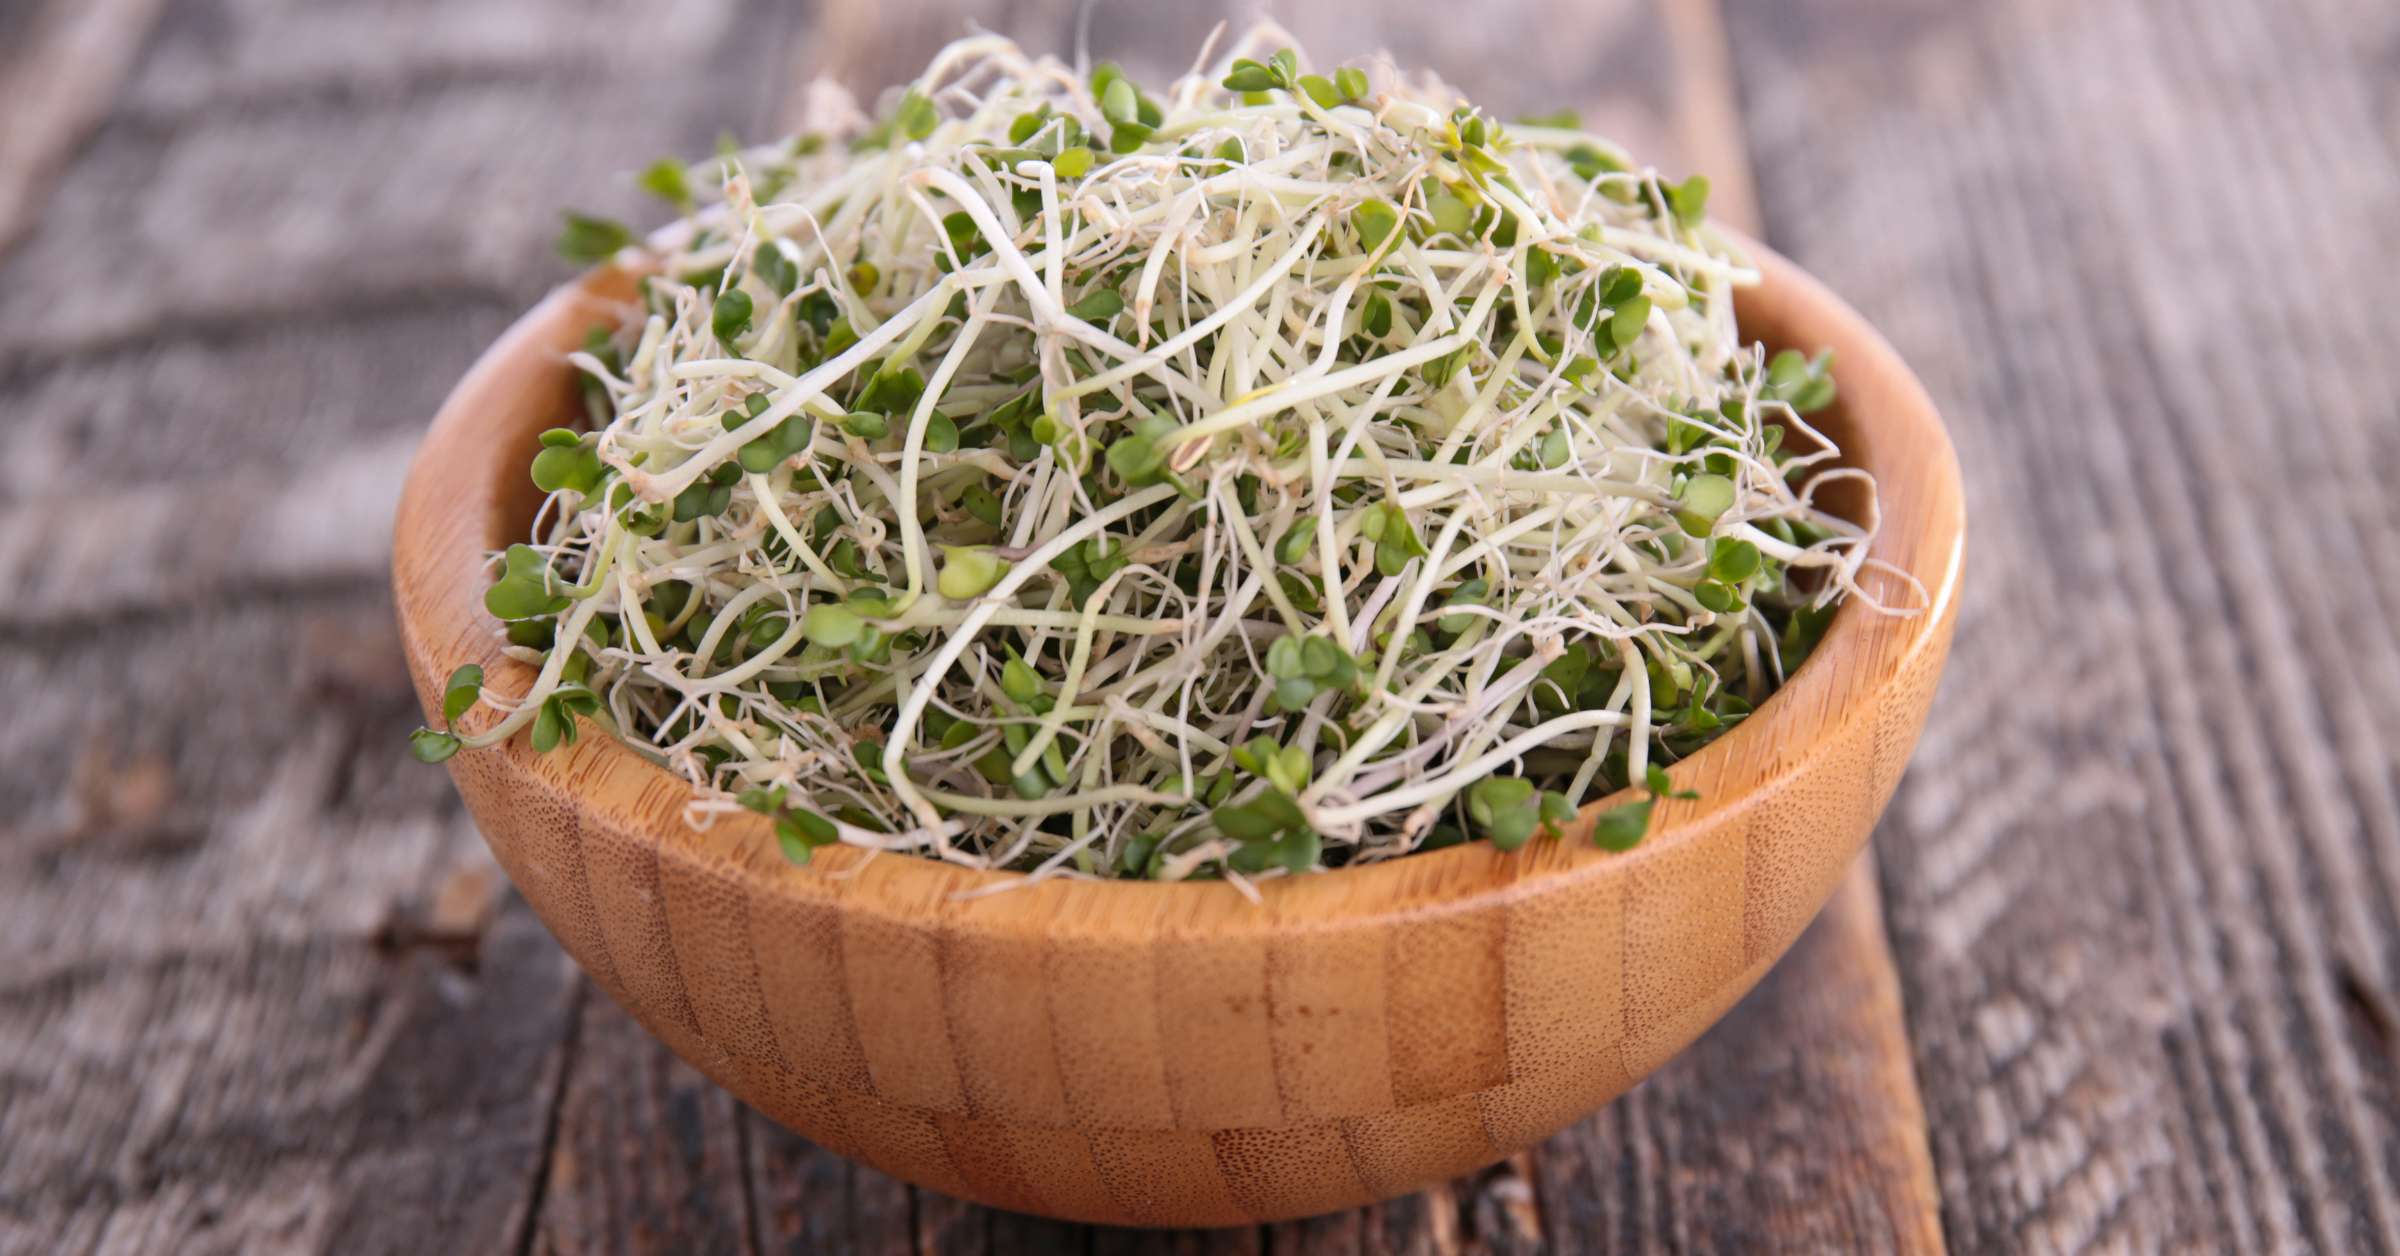 Learn all about broccoli sprouts, sulforaphane, diet and how to put yourself first.